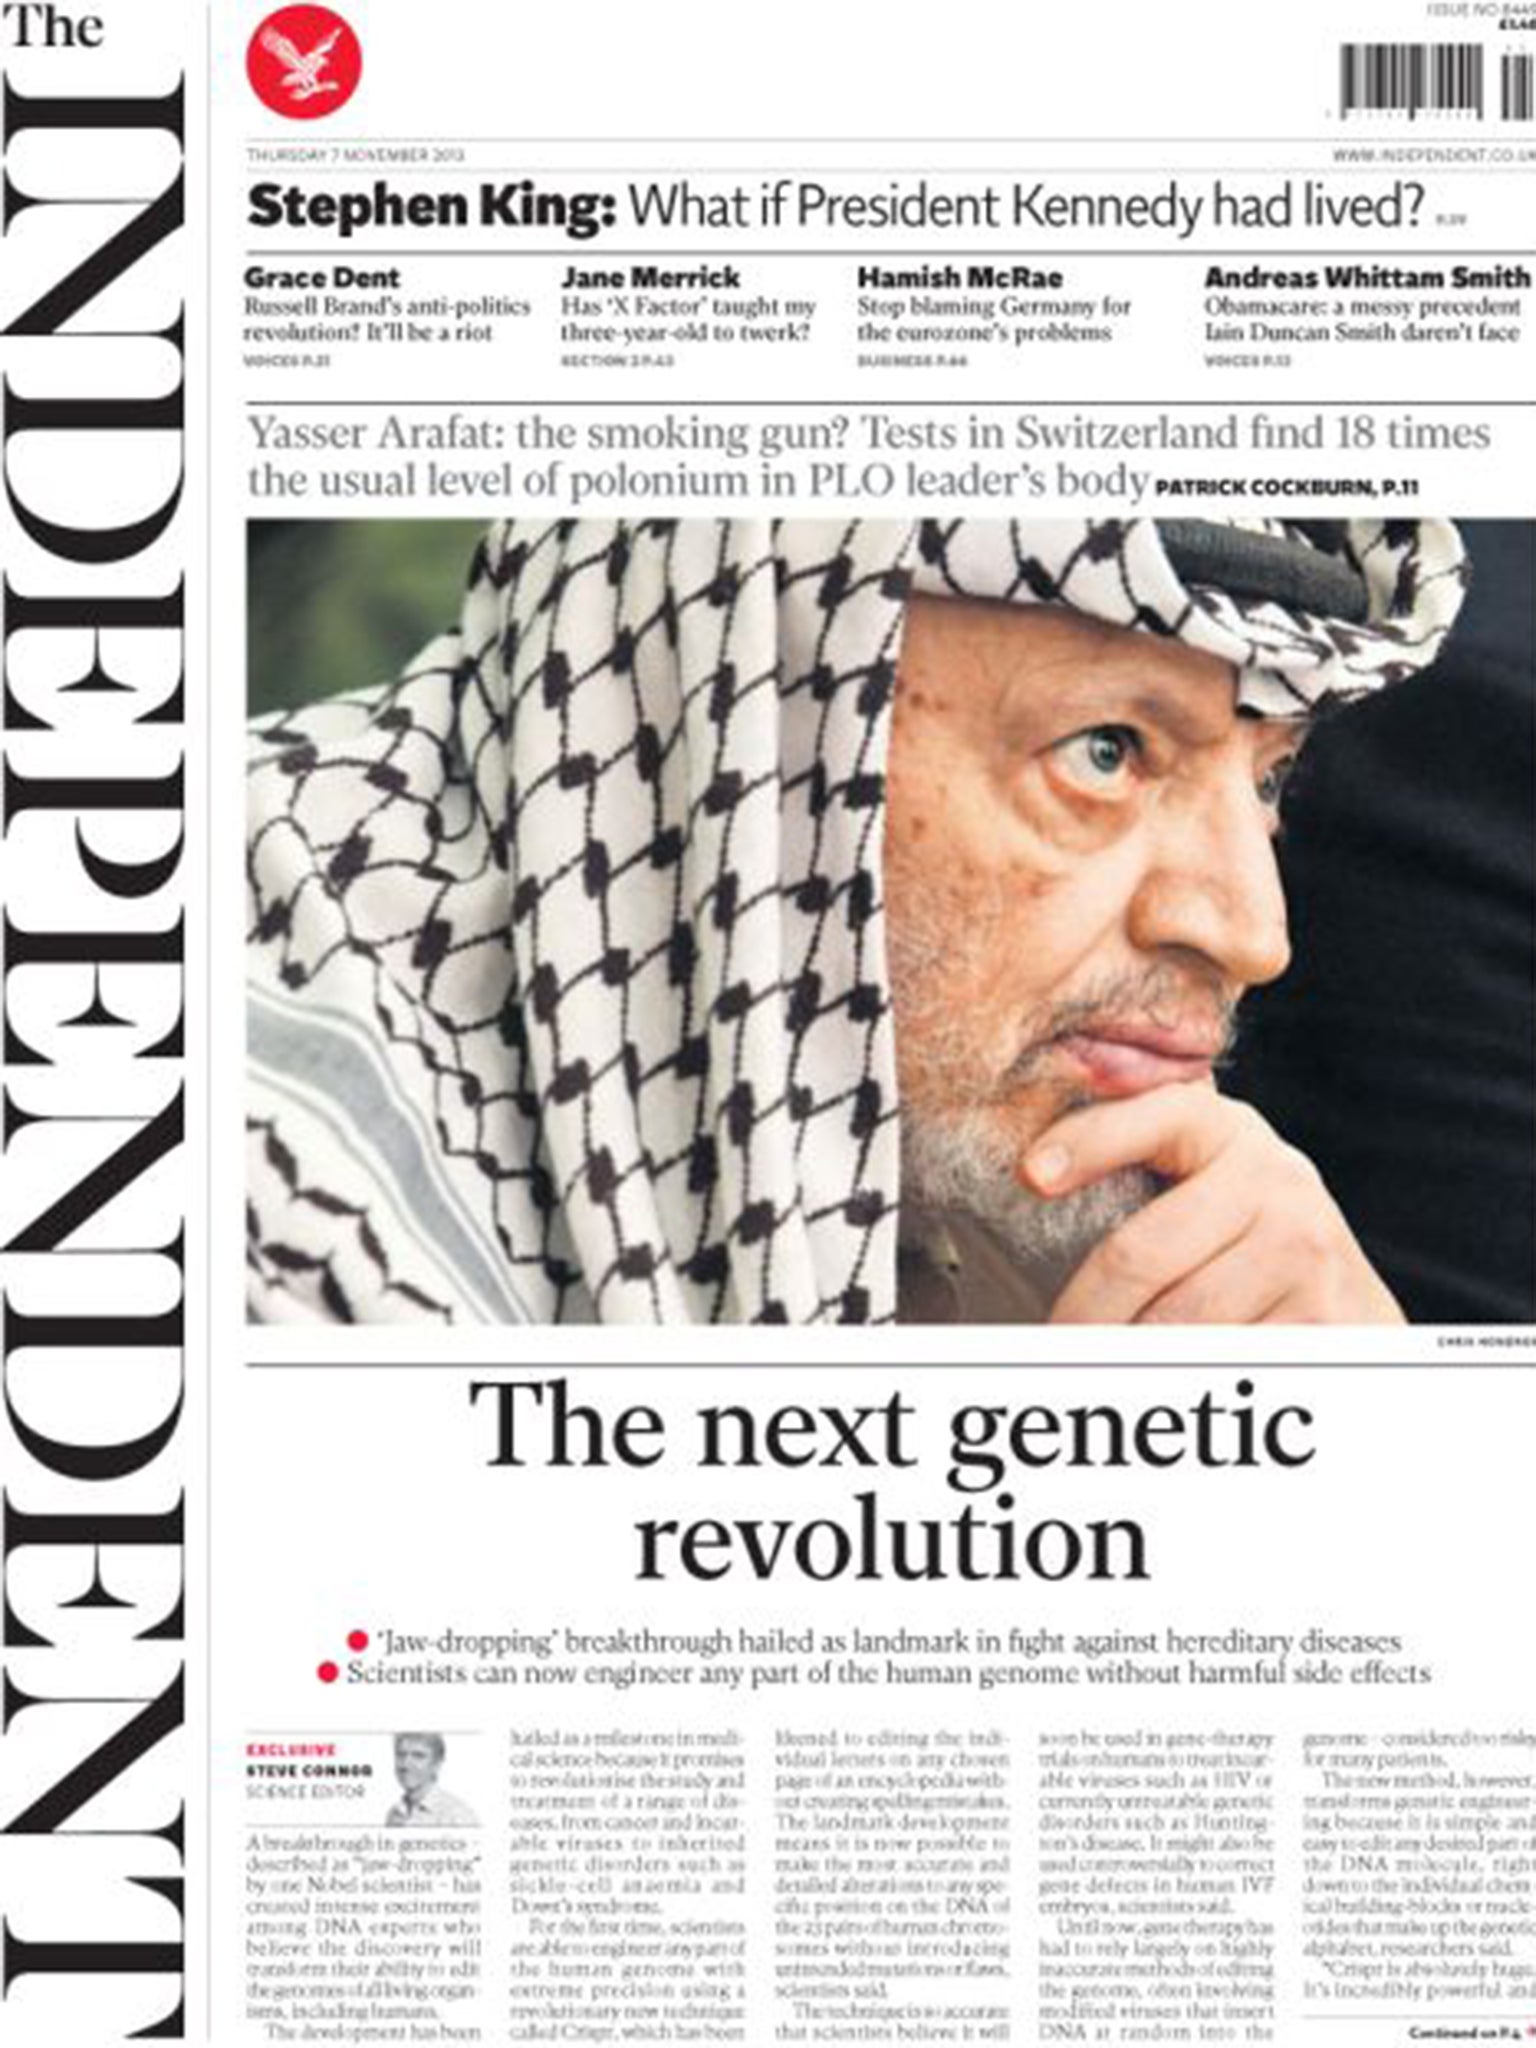 The Independent's front page on the Crispr 'revolution' from 7 November 2013